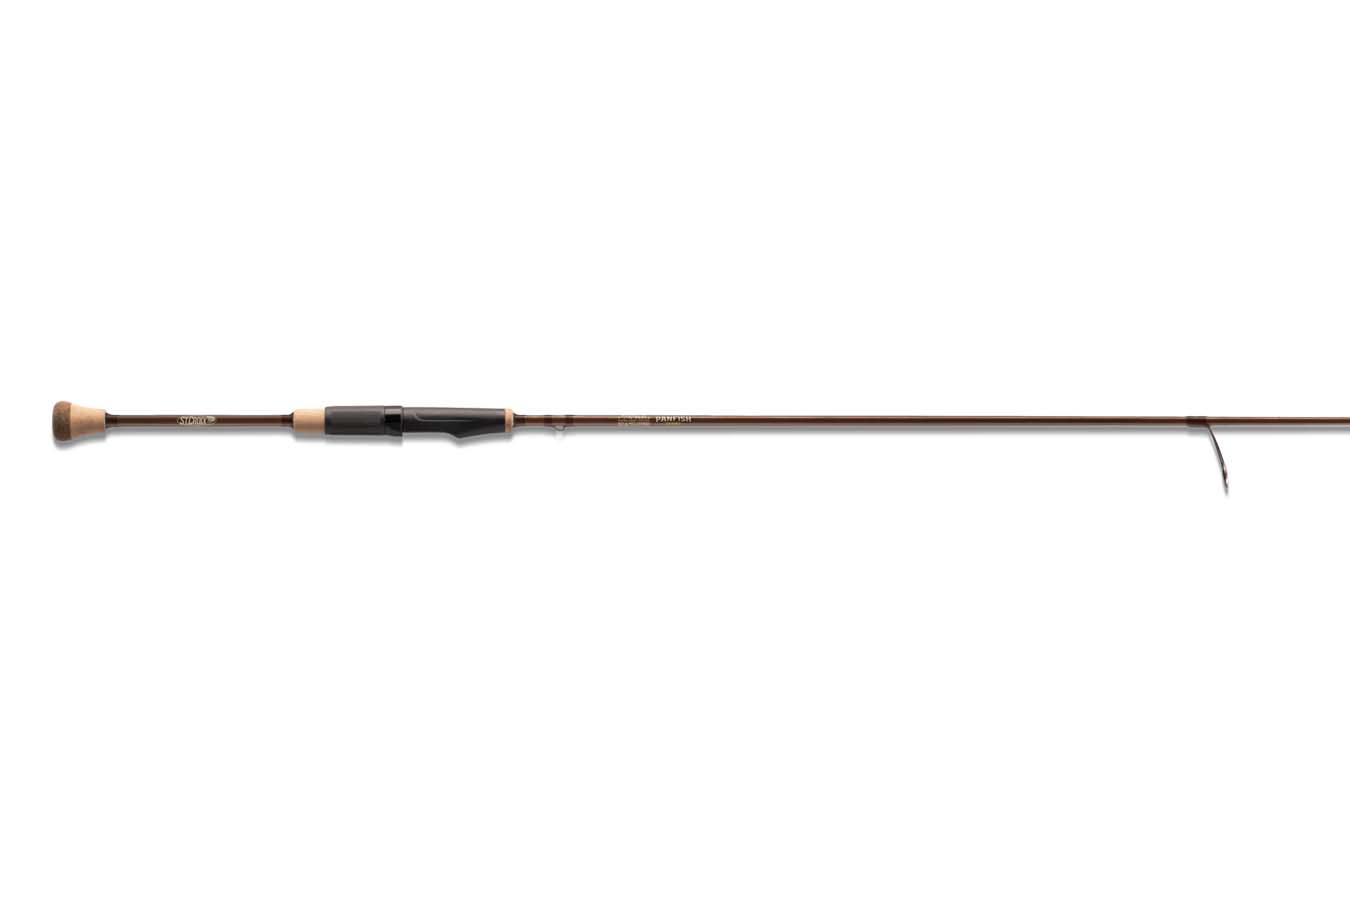 Discount St Croix Panfish 8ft Spinning Rod LMF2 for Sale